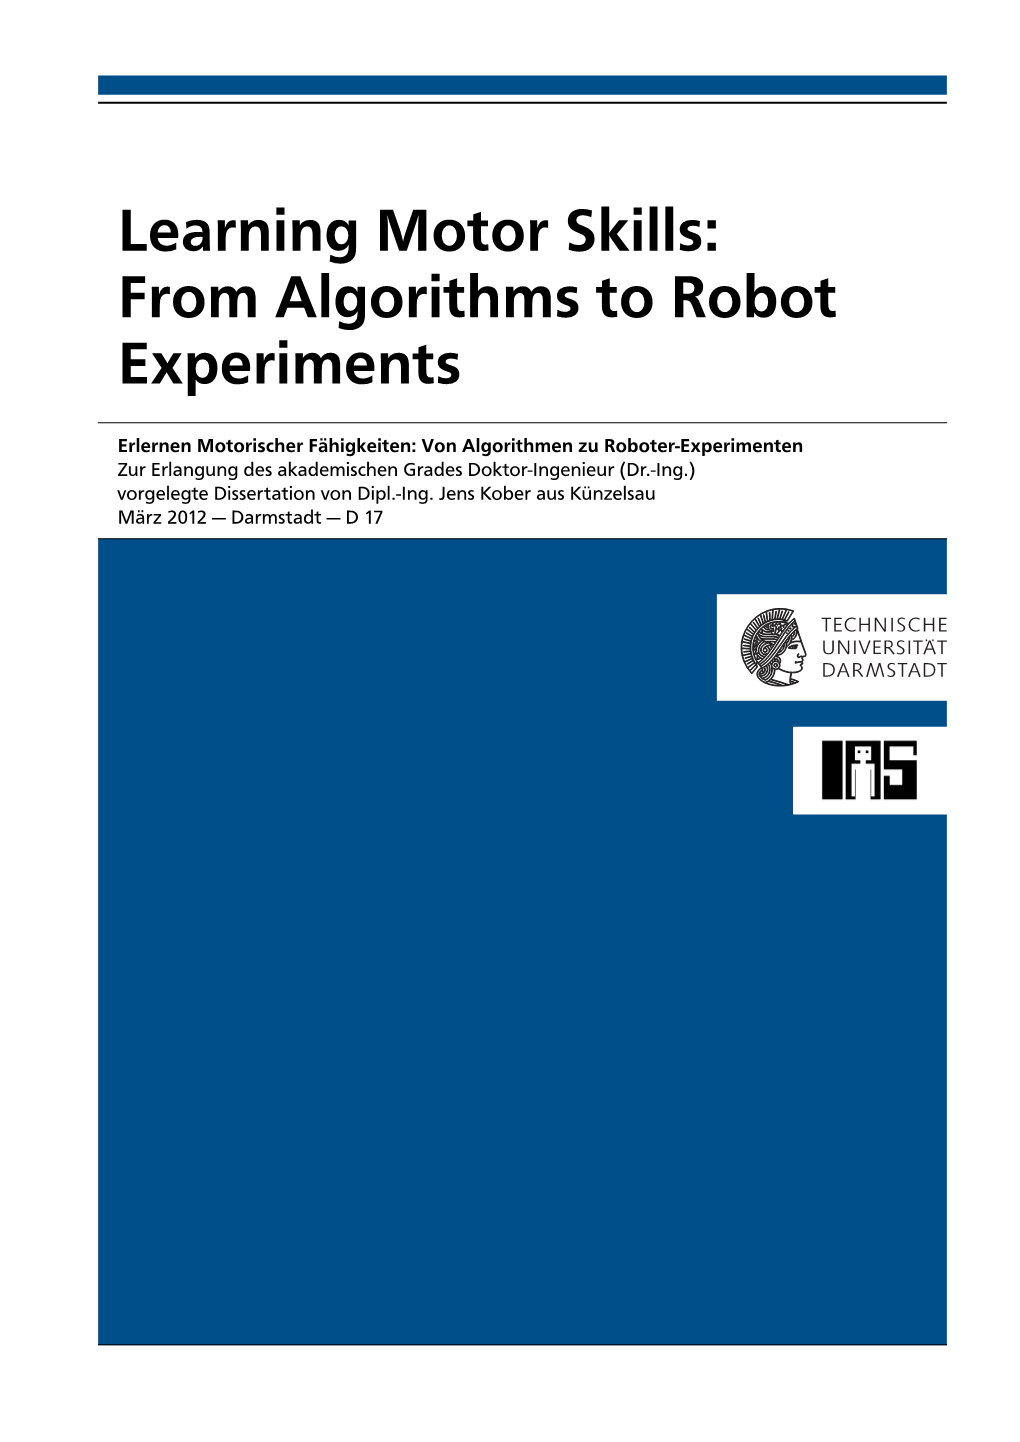 Learning Motor Skills: from Algorithms to Robot Experiments